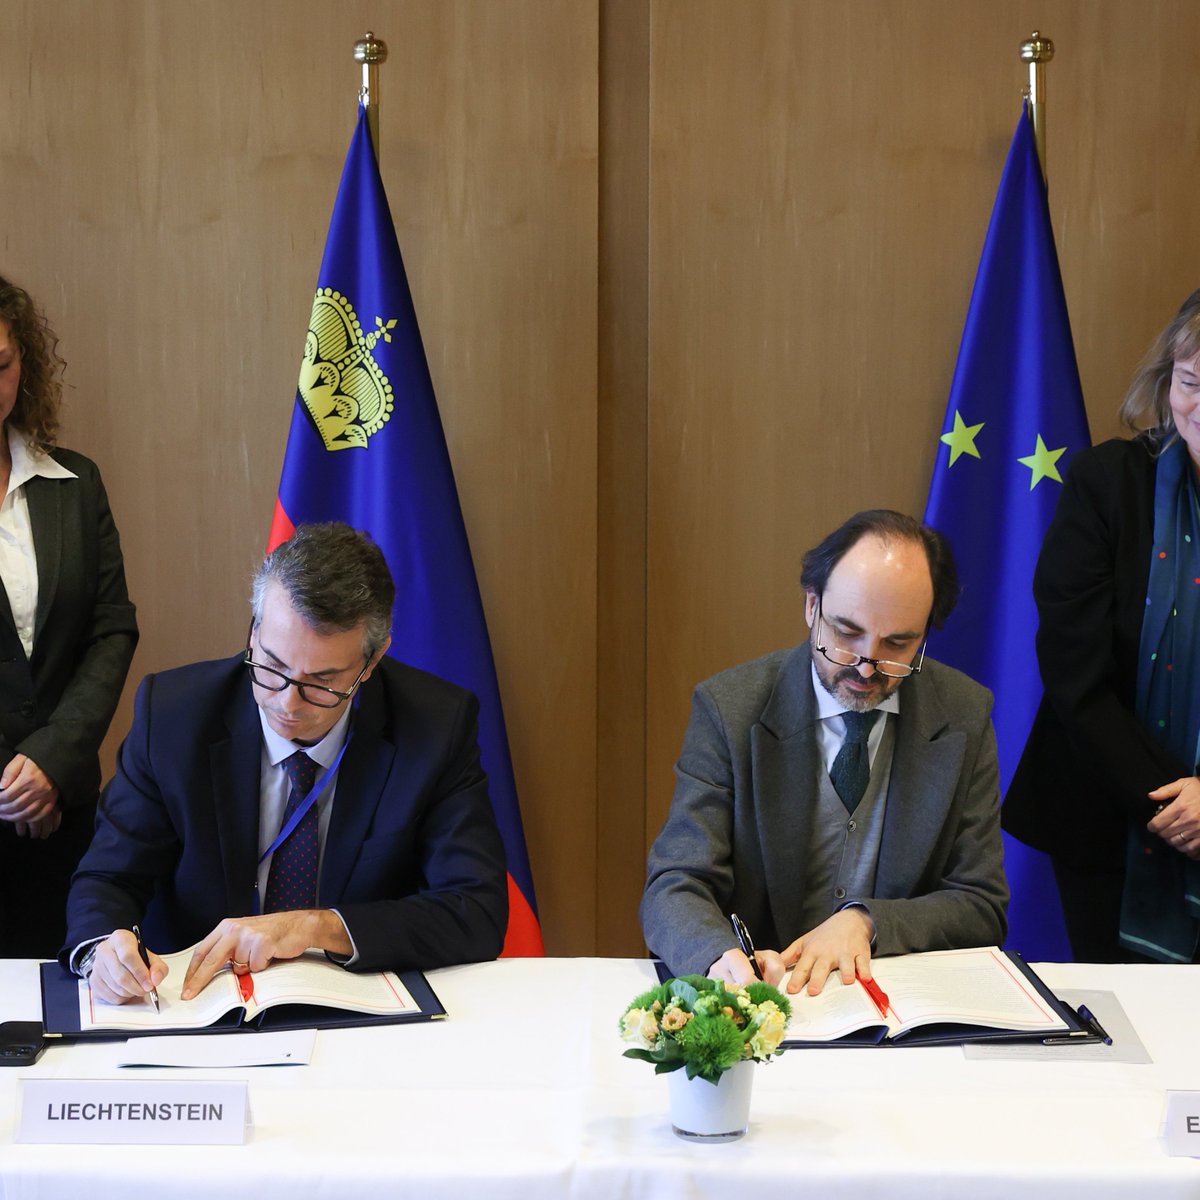 Signed! 🖊️🇱🇮🤝🇪🇺 Today, the EU and Liechtenstein signed the supplementary agreement for our participation in the BMVI, which will enable us to work together for a safer Schengen area.